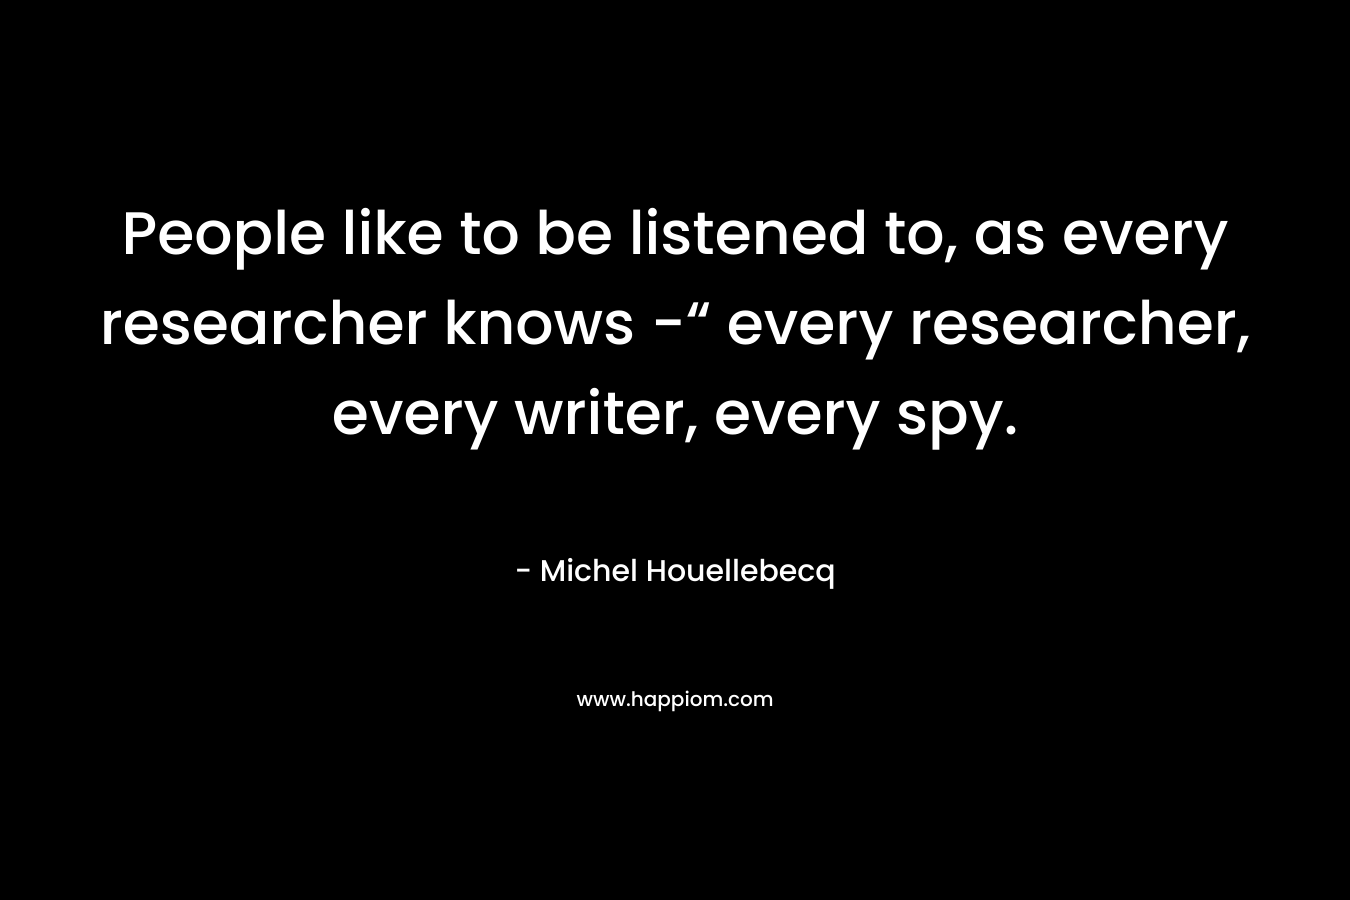 People like to be listened to, as every researcher knows -“ every researcher, every writer, every spy.